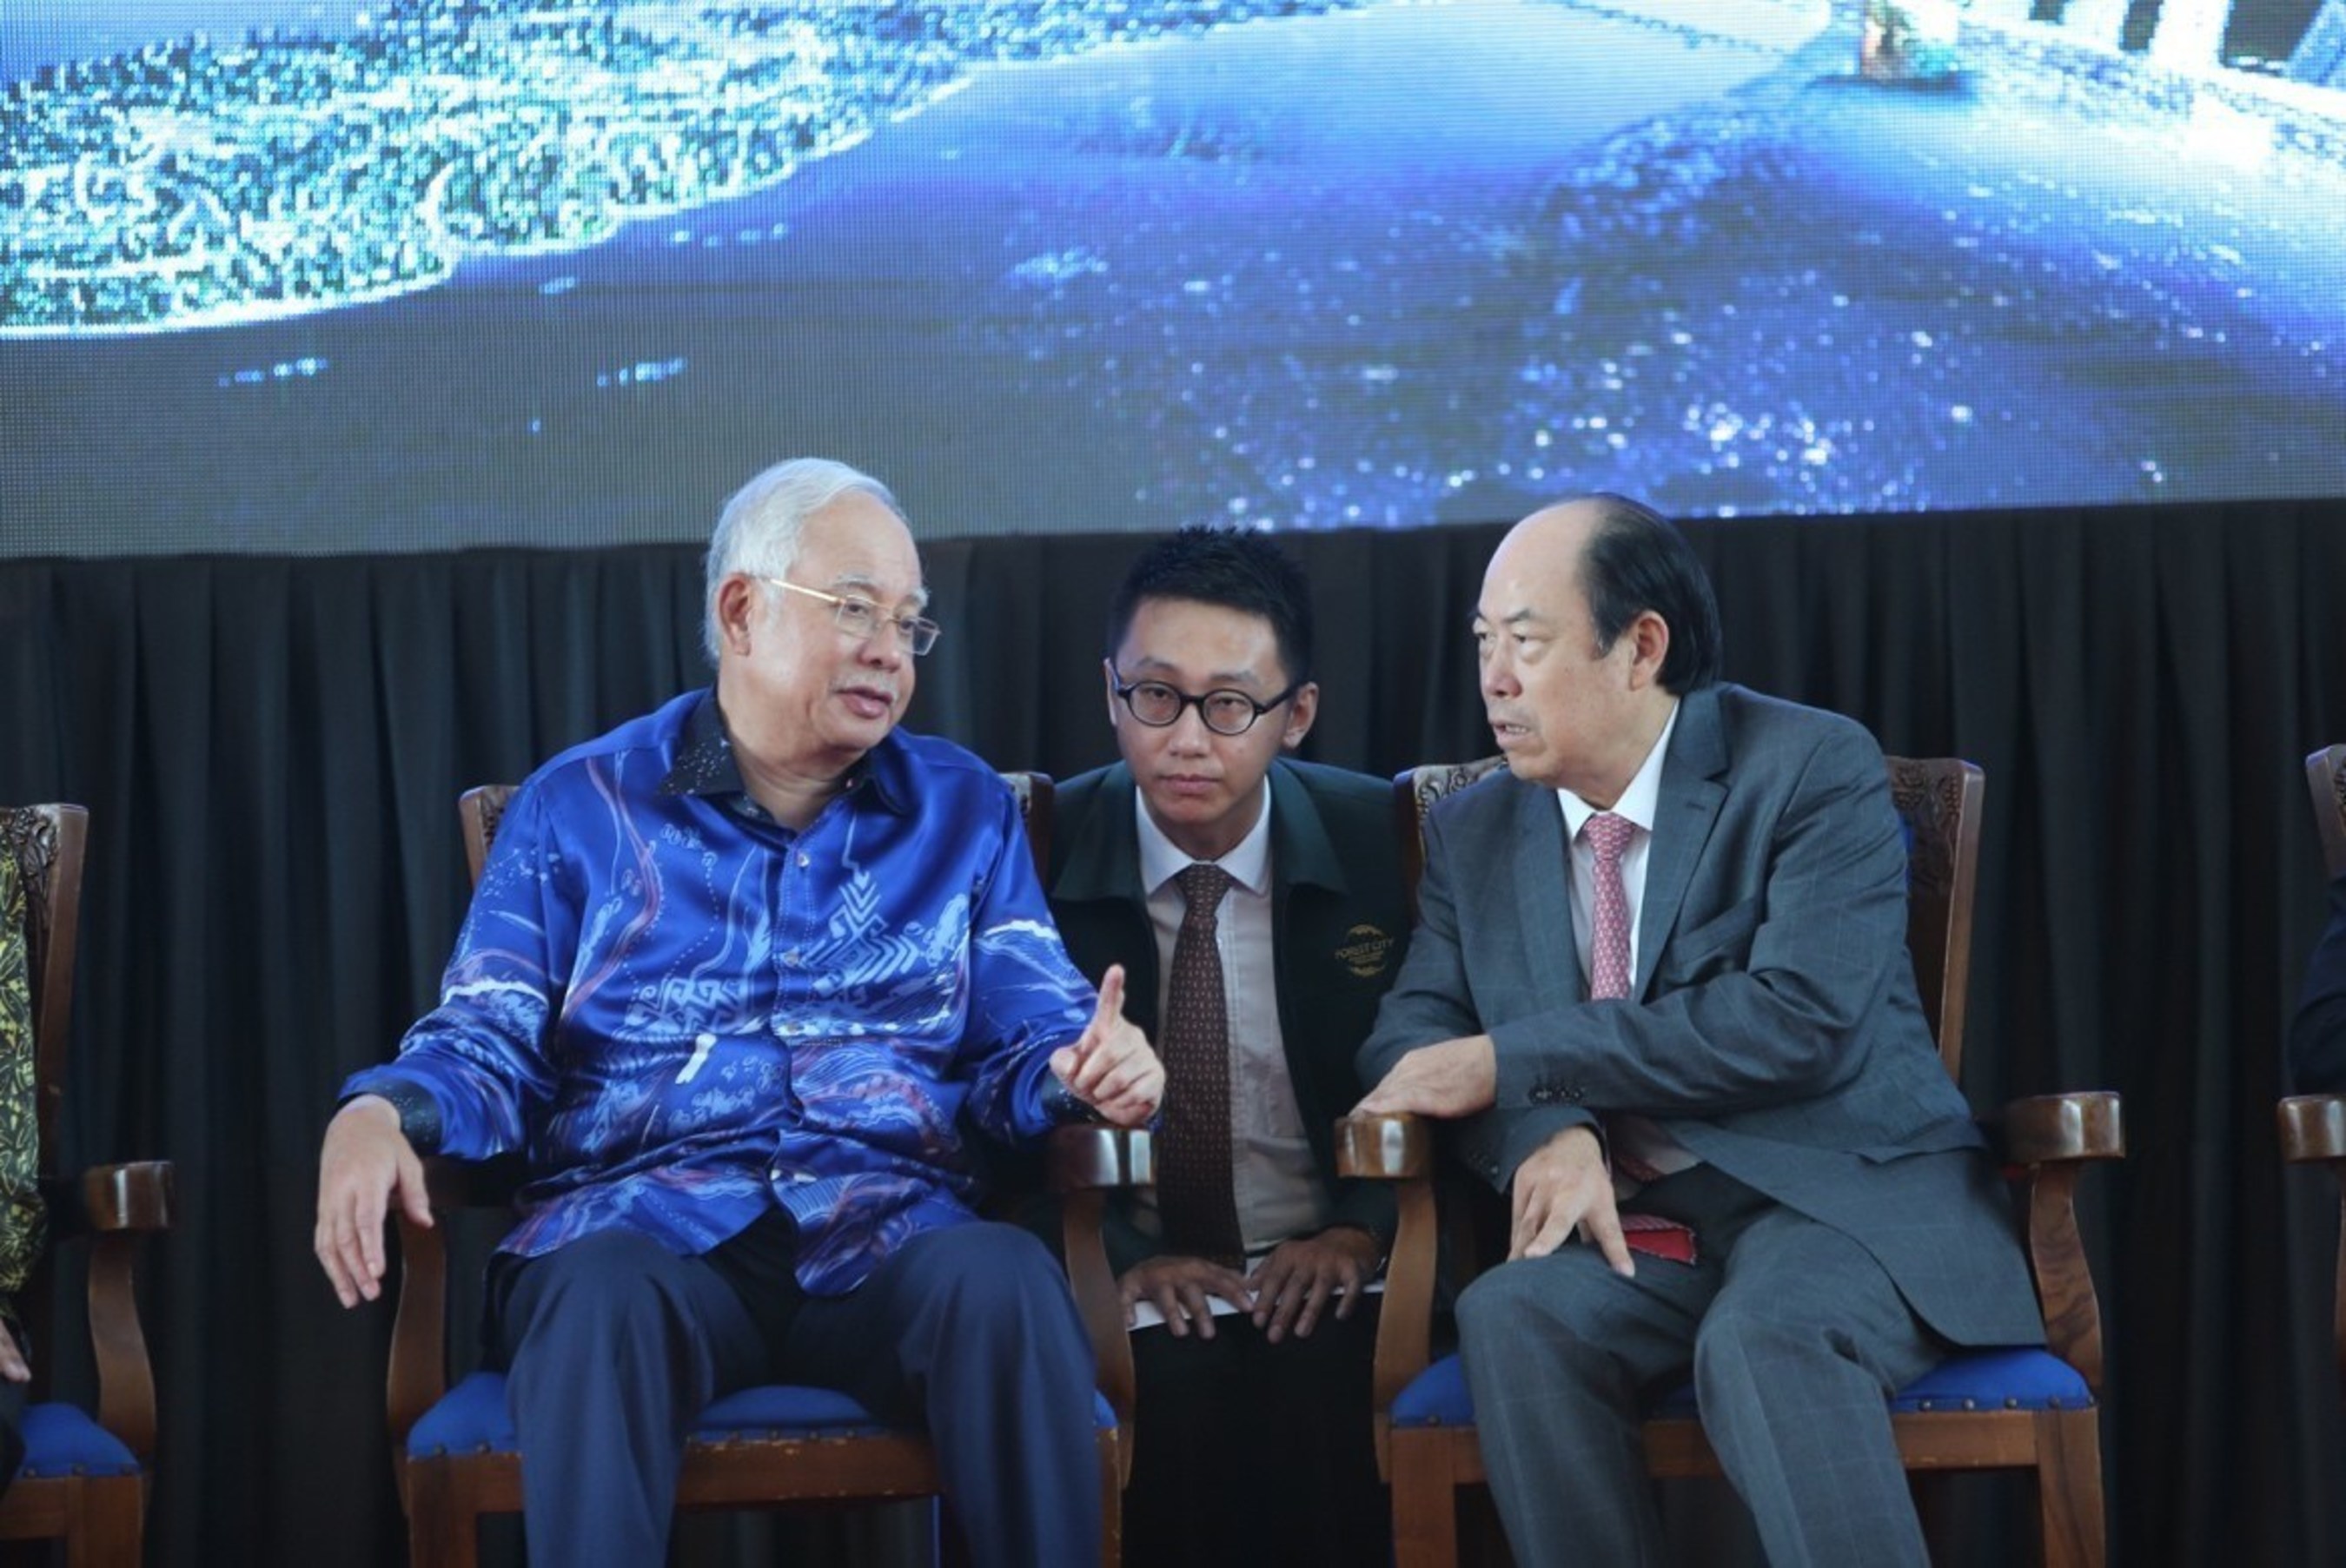 Malaysia's Prime Minister Najib (on the left) and Country Garden Group's Board Chairman Yang Guoqiang (on the right)